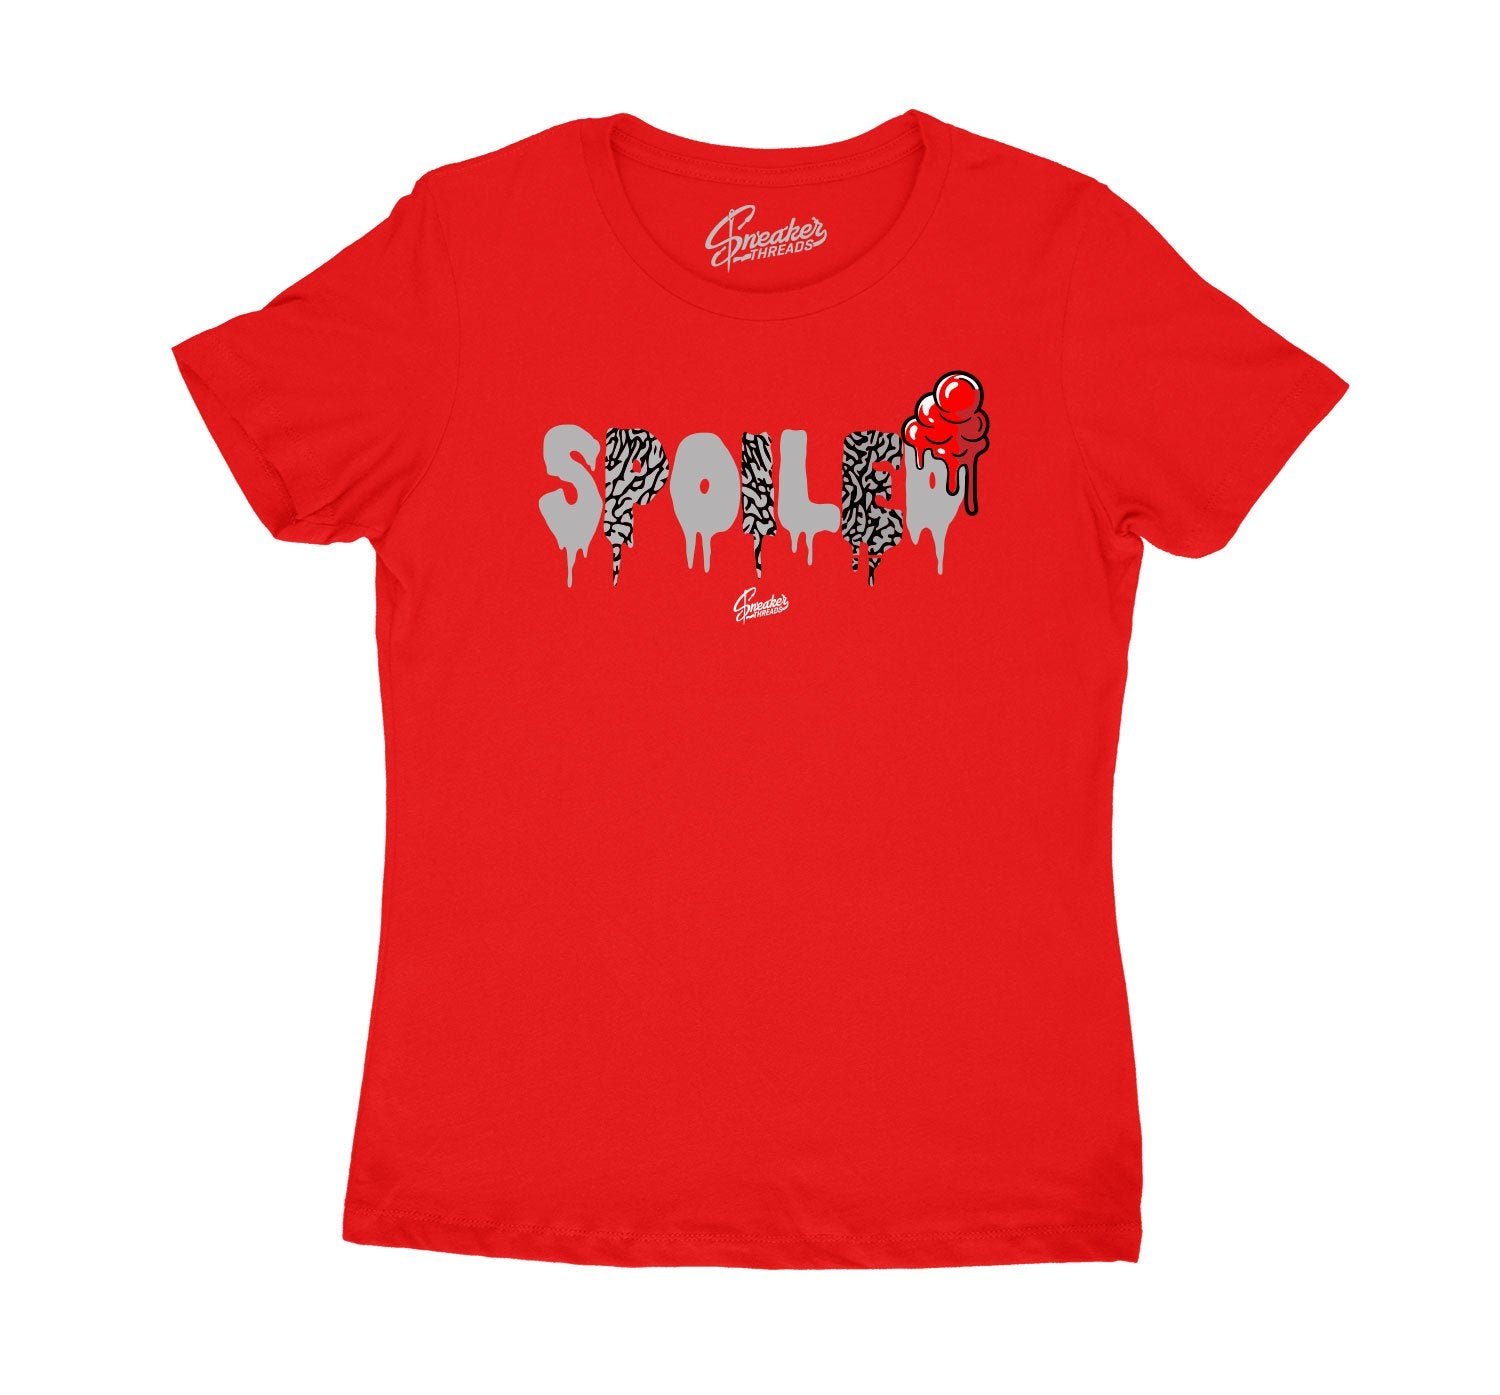 Women shirts to match perfect with Cement 3's